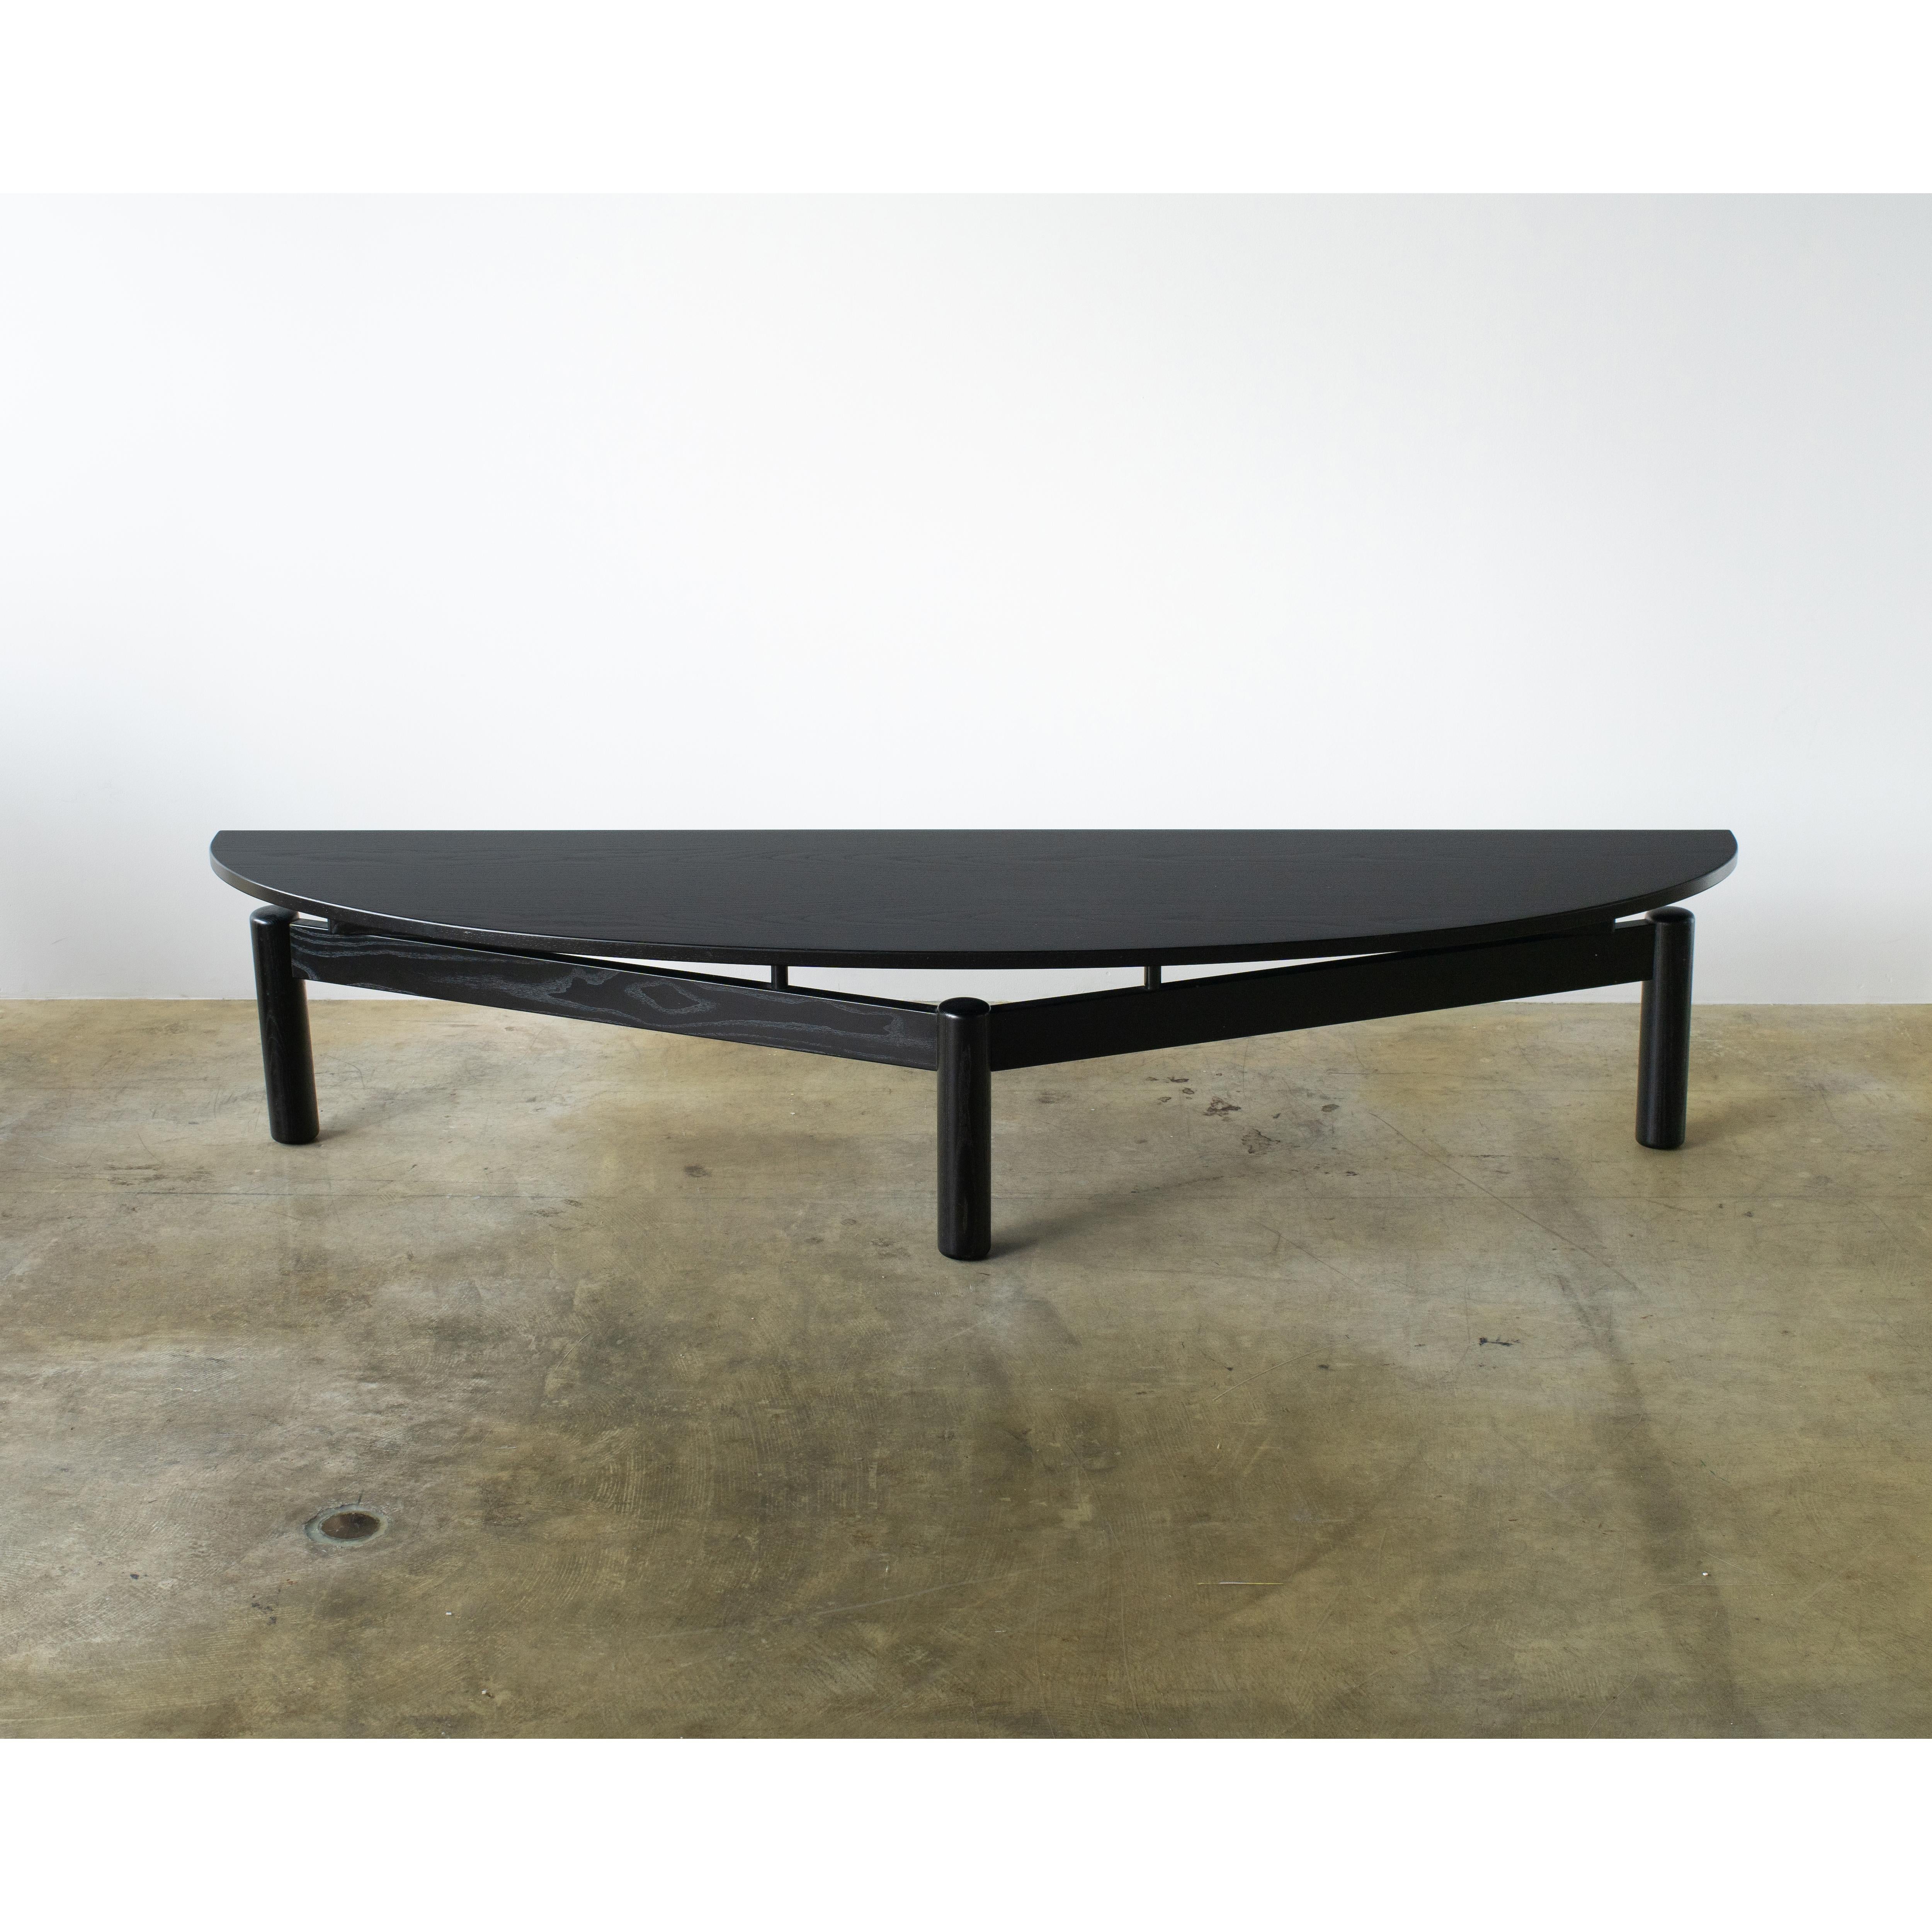 Sindbad coffee table
Designed by Vico Magistretti for Cassina. Half oval shaped table designed for center table. Used as low console table put in front of the wall. Probably it can be used as TV side board.
Made of wood, black painted.